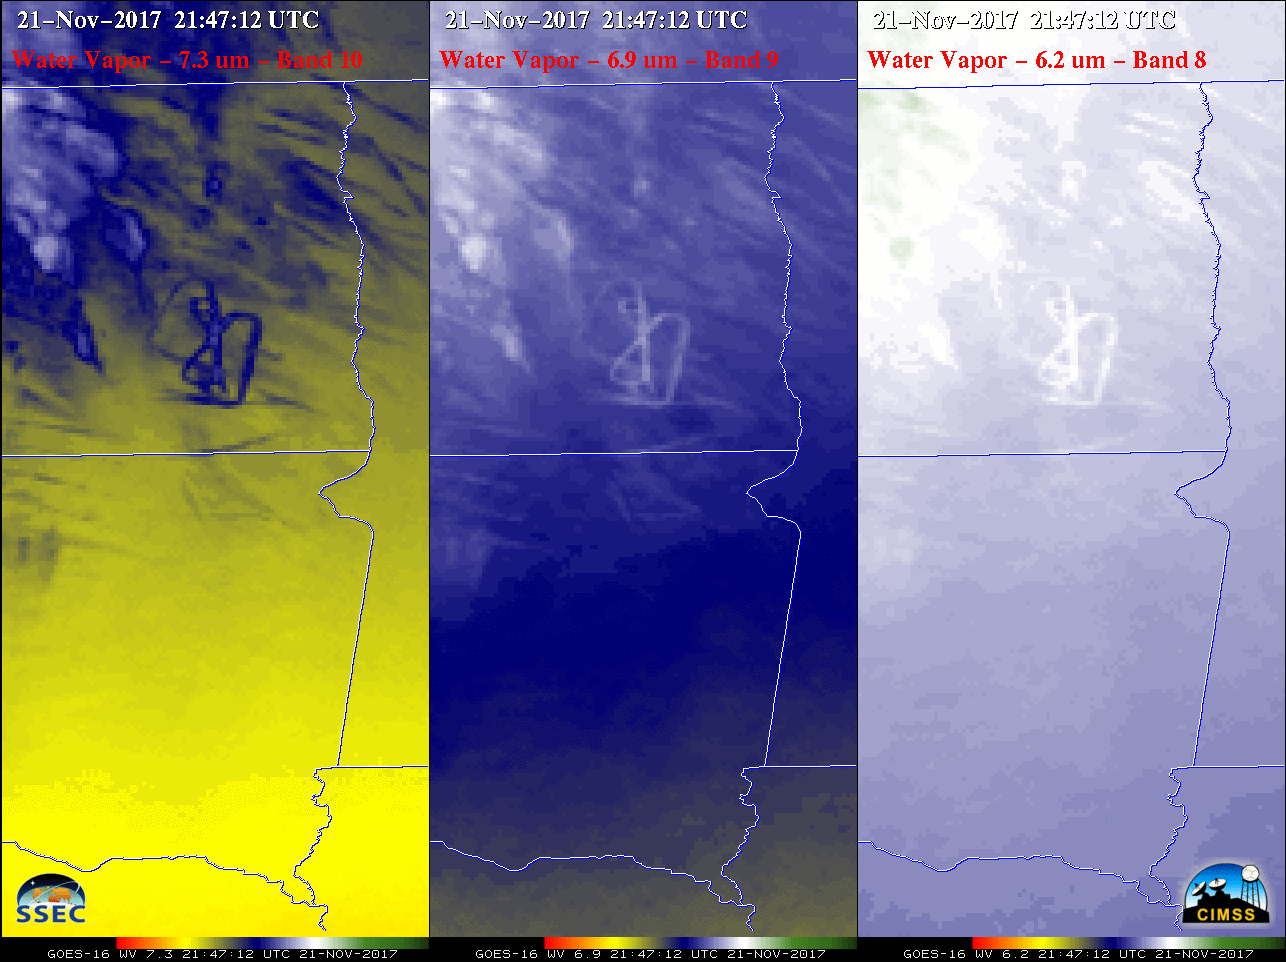 GOES-16 Lower-level (10.3 µm, left), Mid-level (6.9 µm, center) and Upper-level (6.2 µm, right) Water Vapor images, with surface station identifiers plotted in cyan [click to play animation]